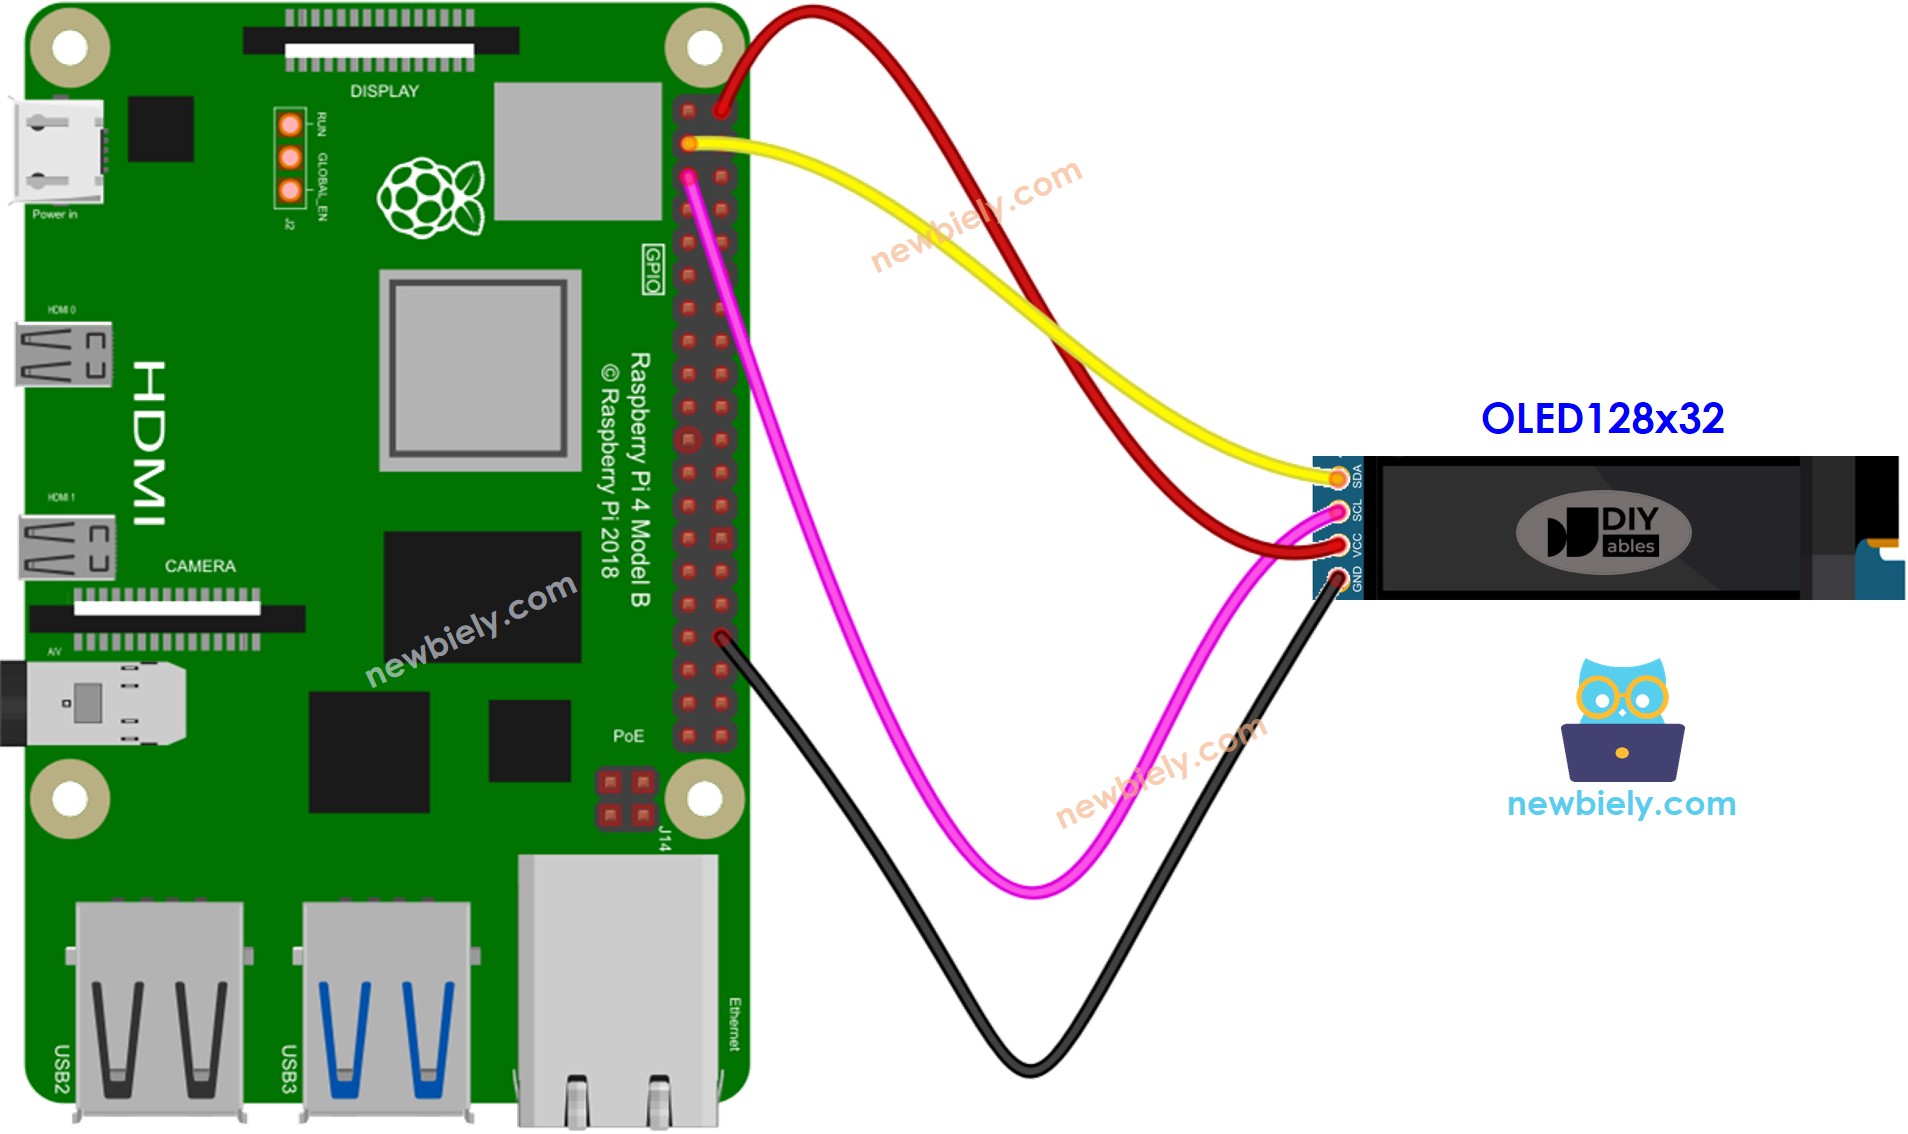 The wiring diagram between Raspberry Pi and OLED 128x64